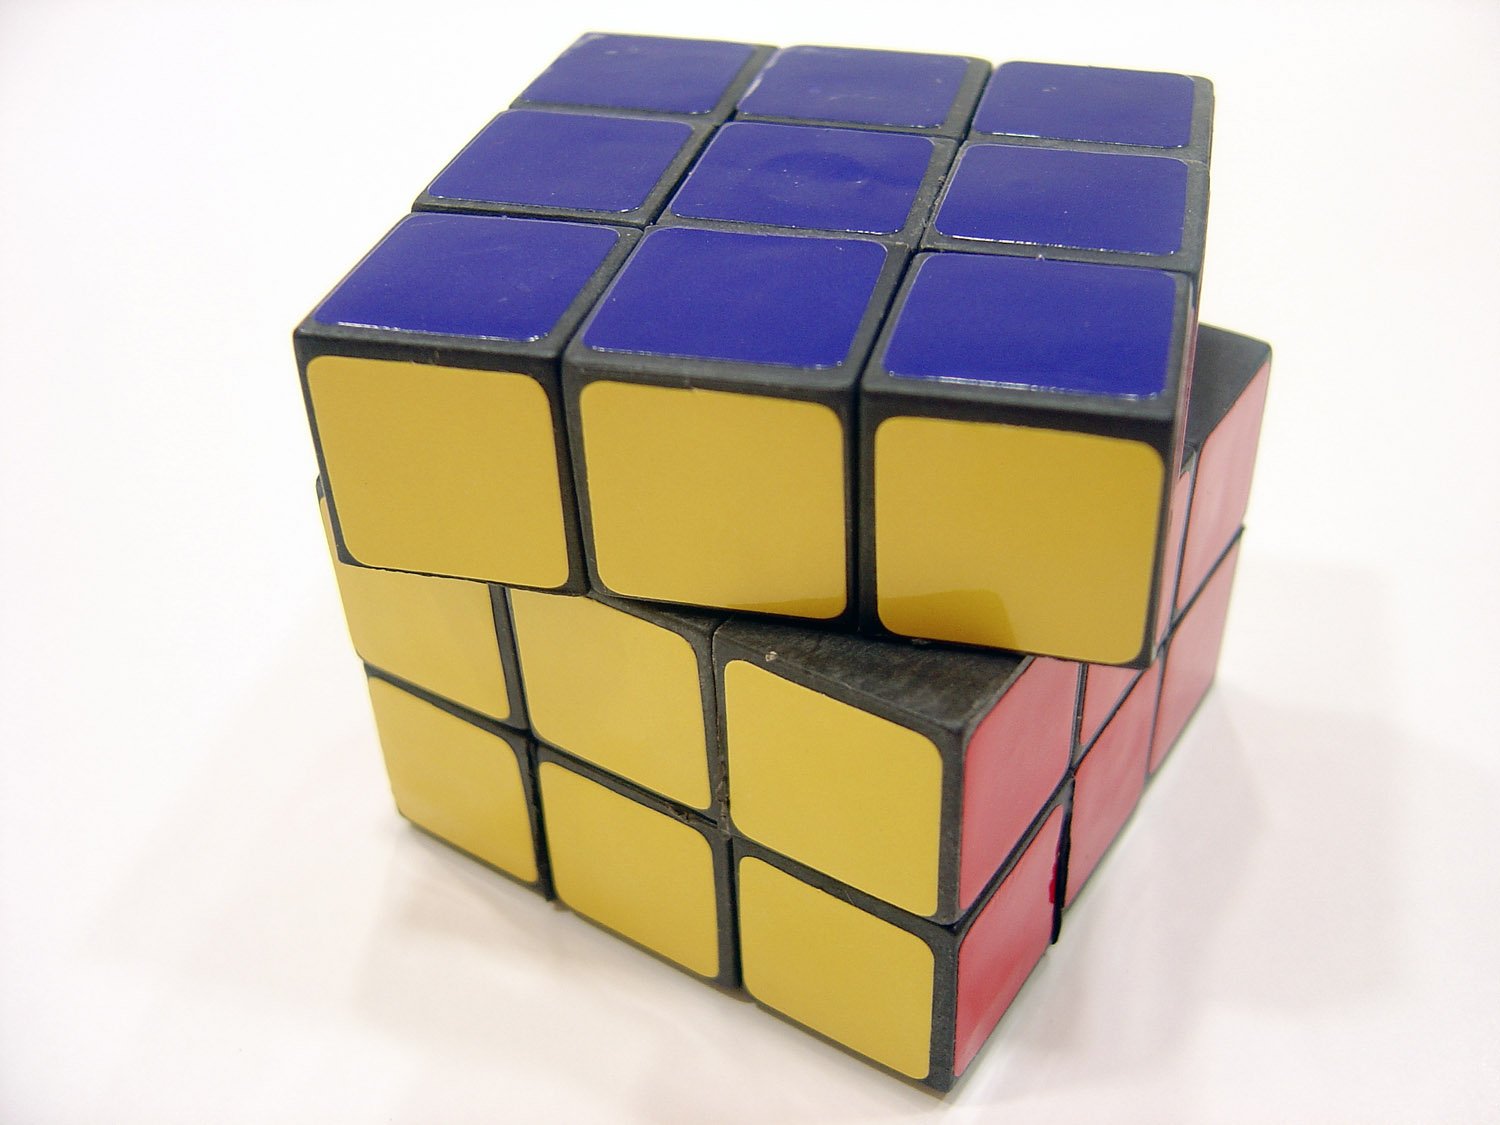 a set of colored cubes stacked up together